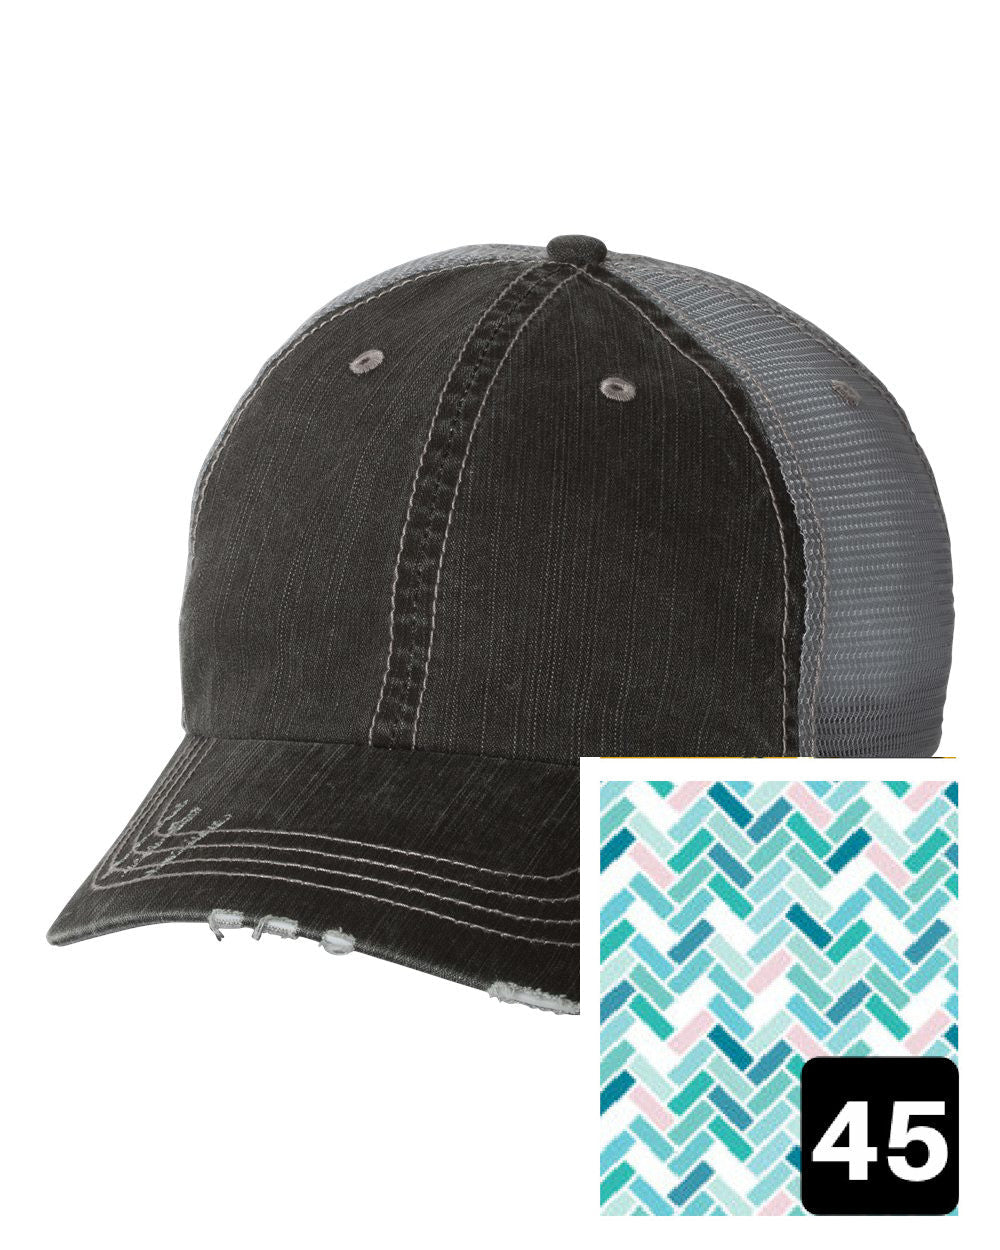 Alabama Hat - Gray Distressed Trucker Cap - Many Fabric Choices